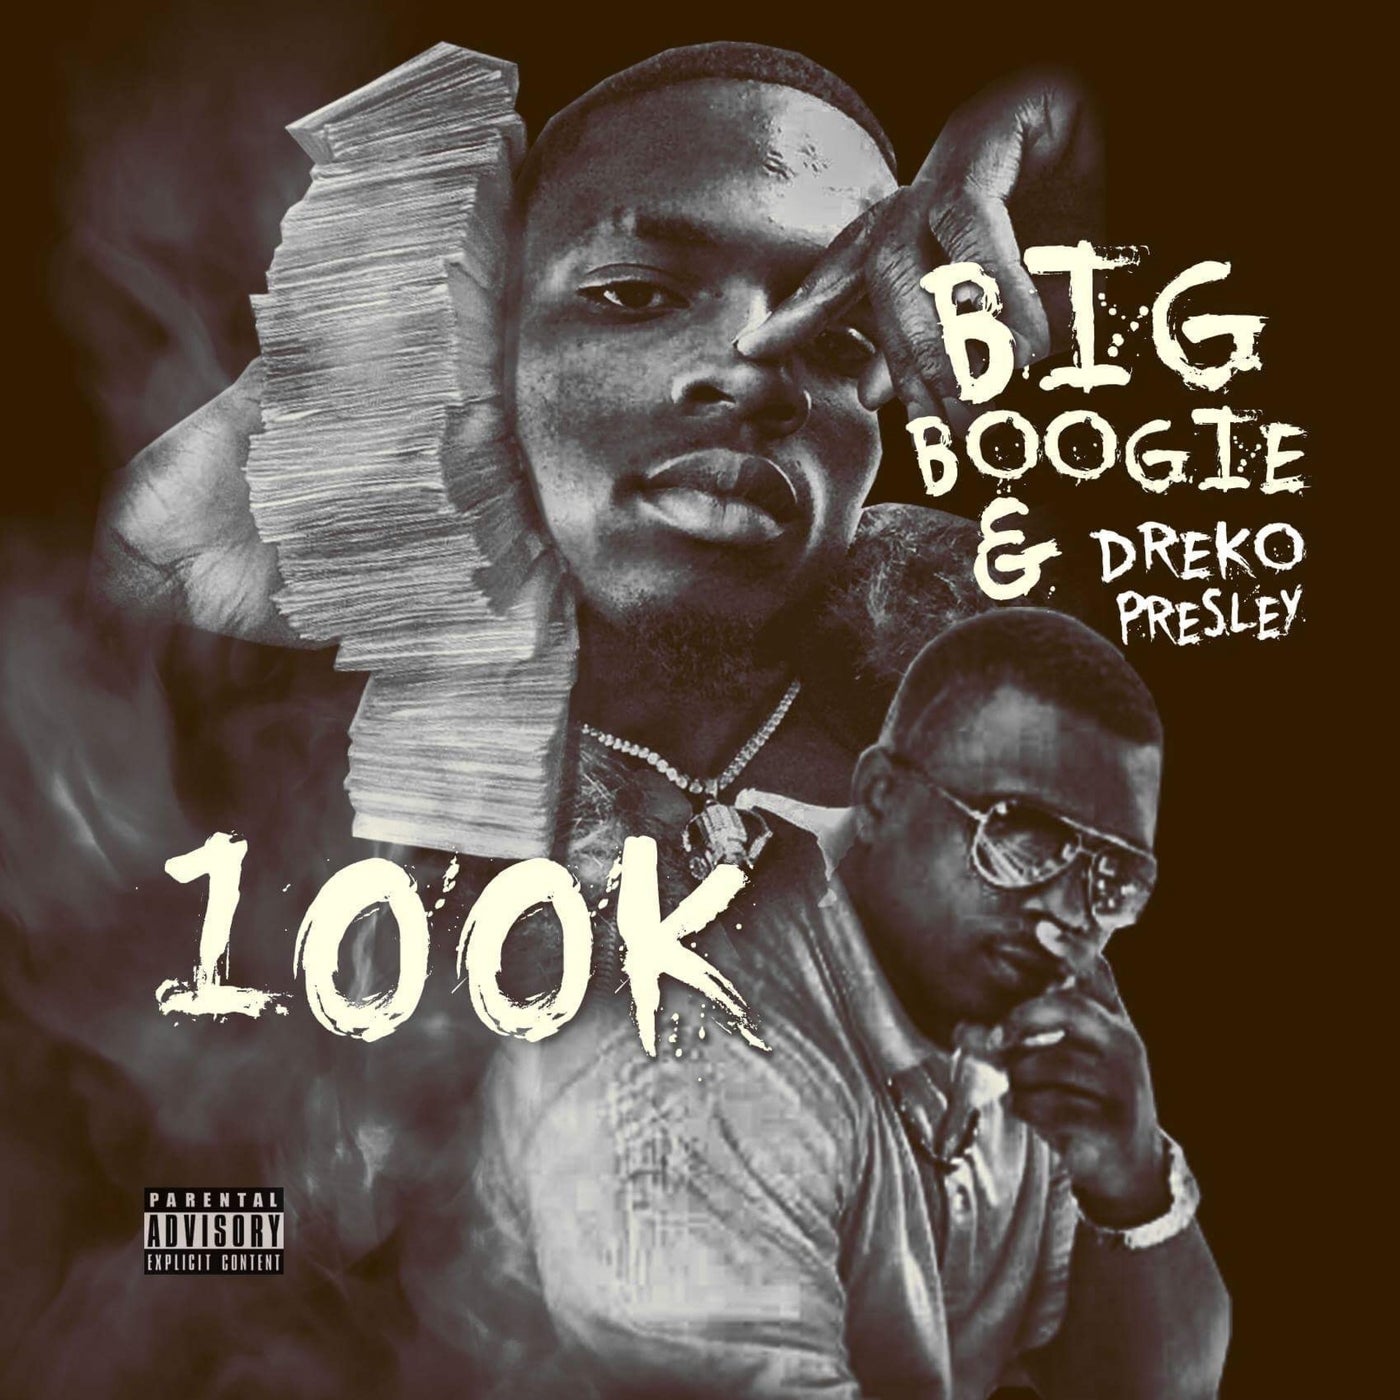 Stream Big Boogie Mental Healing Live Performance oNe TaKE BIG BOOGIE  MUSIC by BBZeus  Listen online for free on SoundCloud